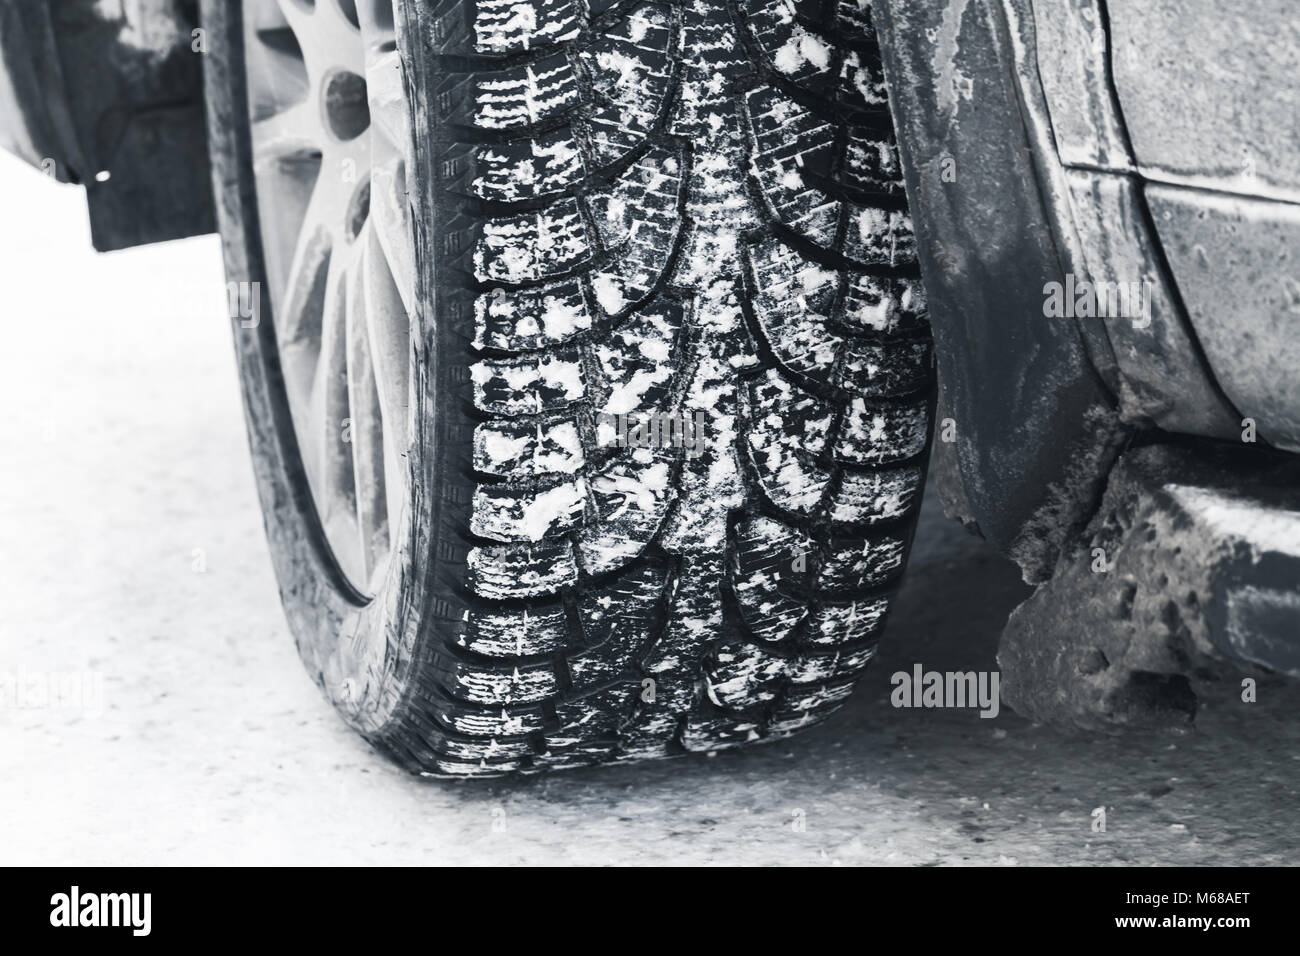 Close-up photo of car wheel on snow tire with metal studs, which improve traction on icy surfaces. Stock Photo